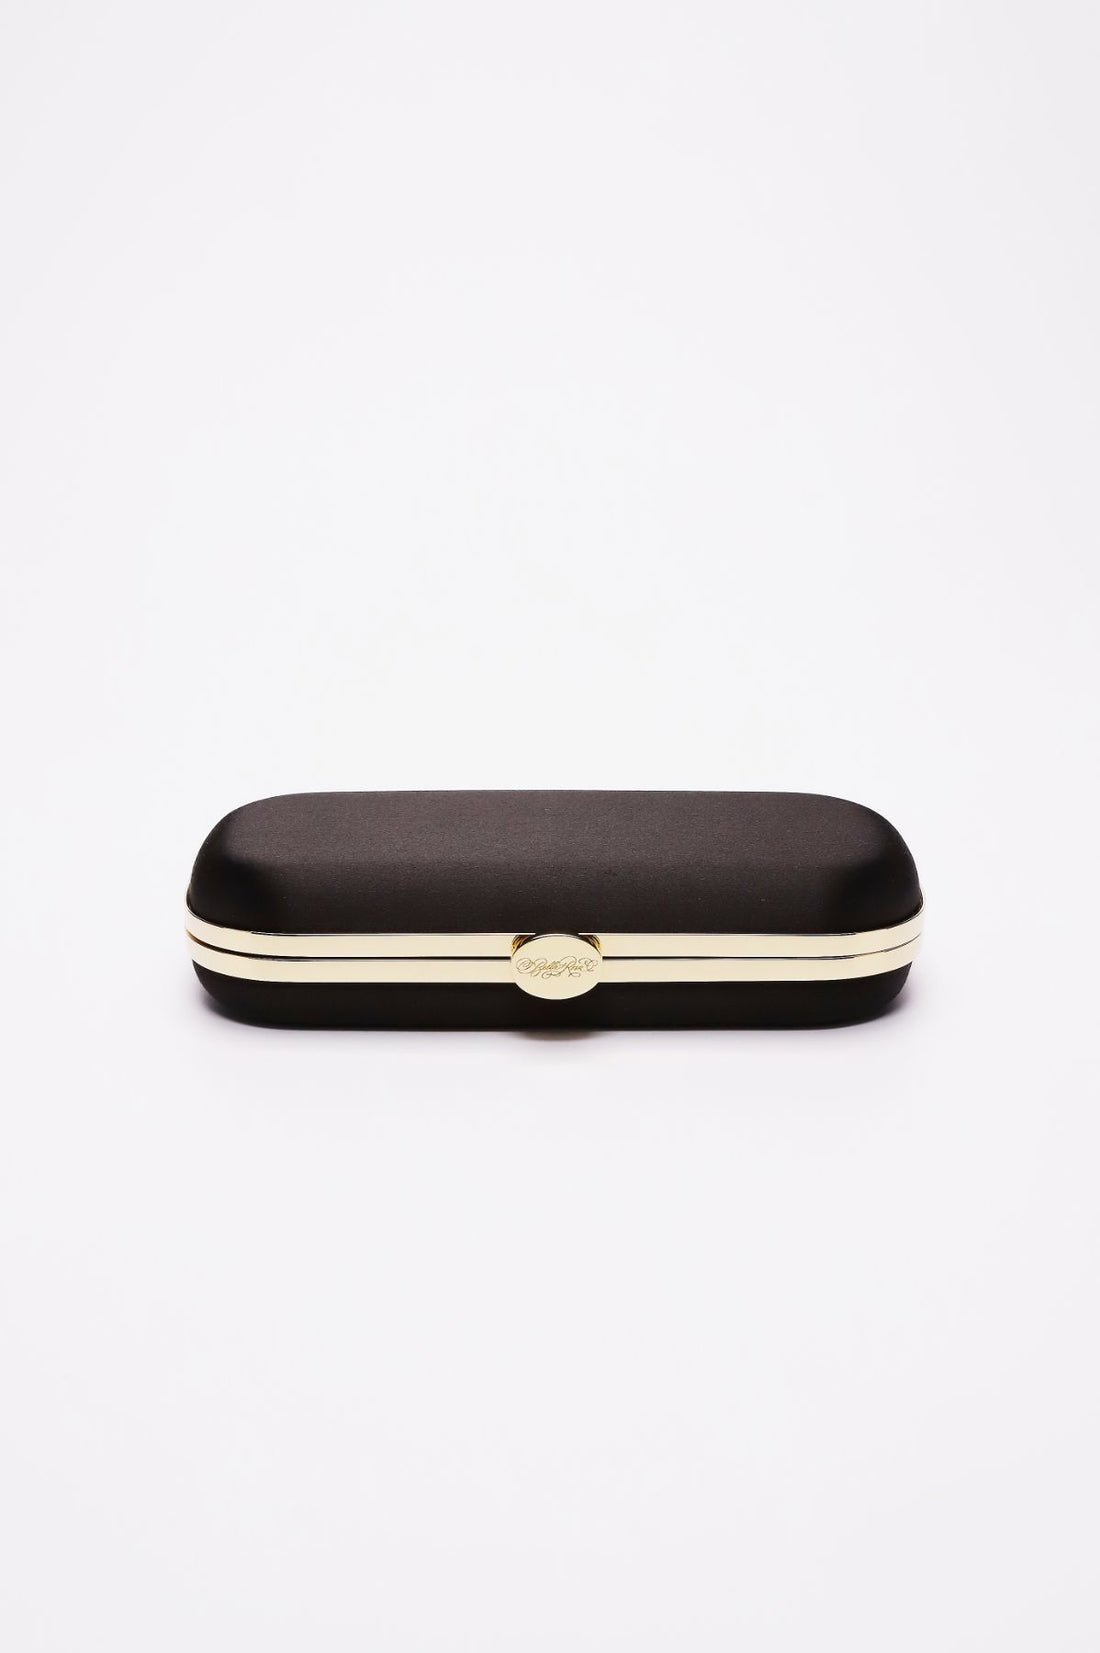 Sentence with replaced product name and brand name: The Bella Rosa Collection Bella Clutch Black Petite glasses case with gold detailing on a white background.